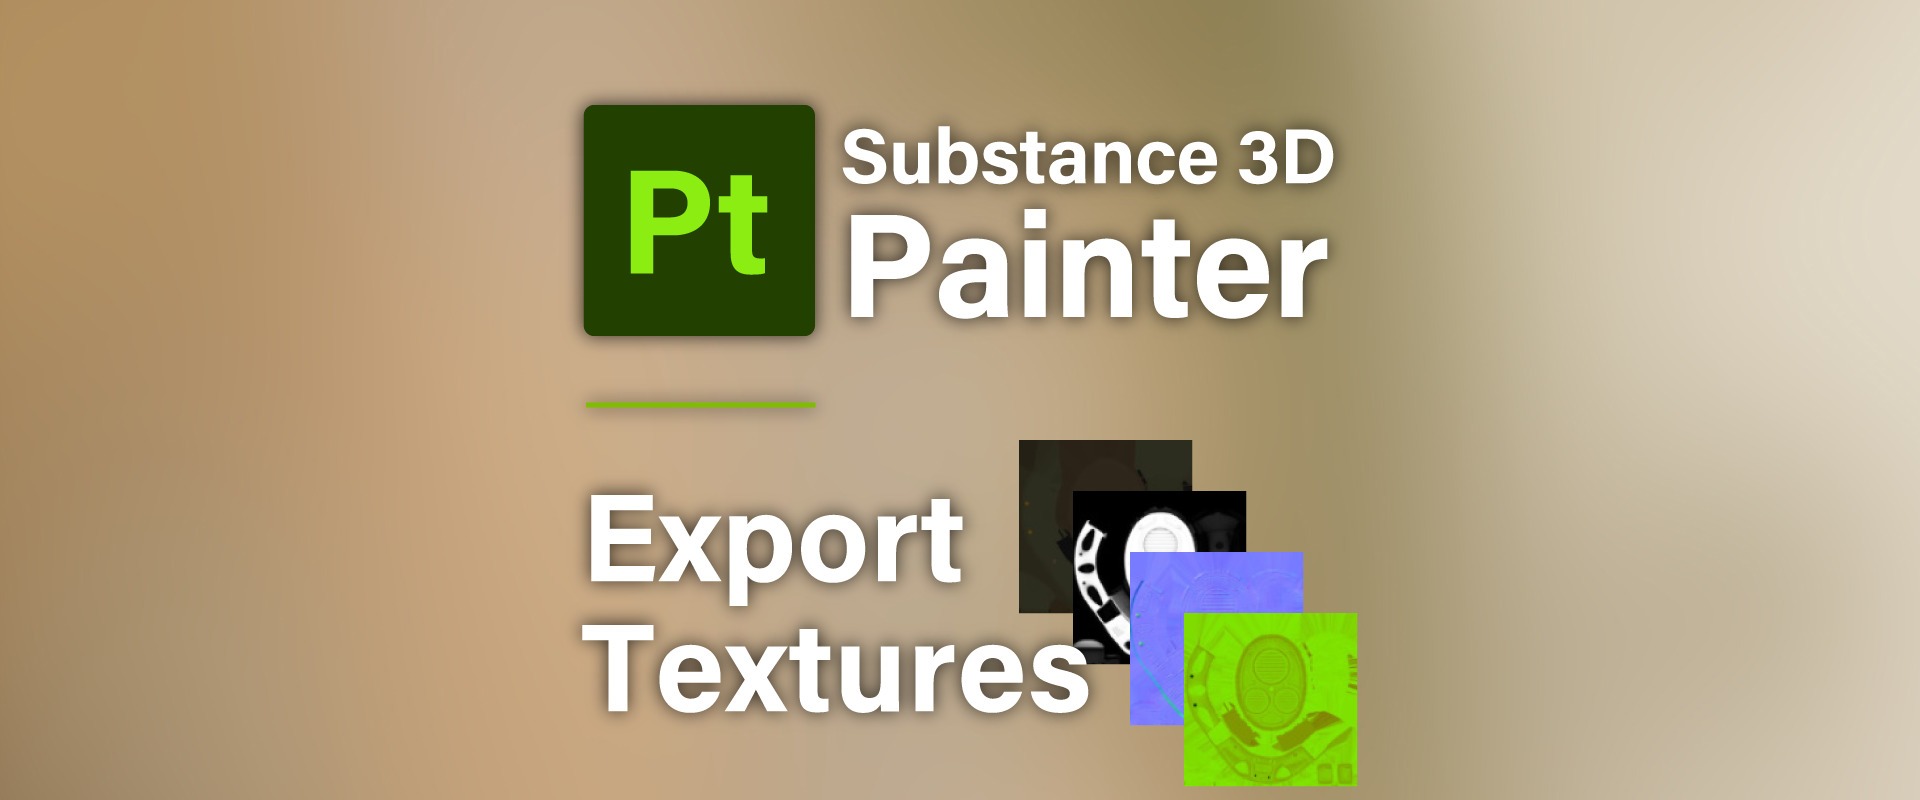 [ Substance 3D Painter ] How to set up texture export